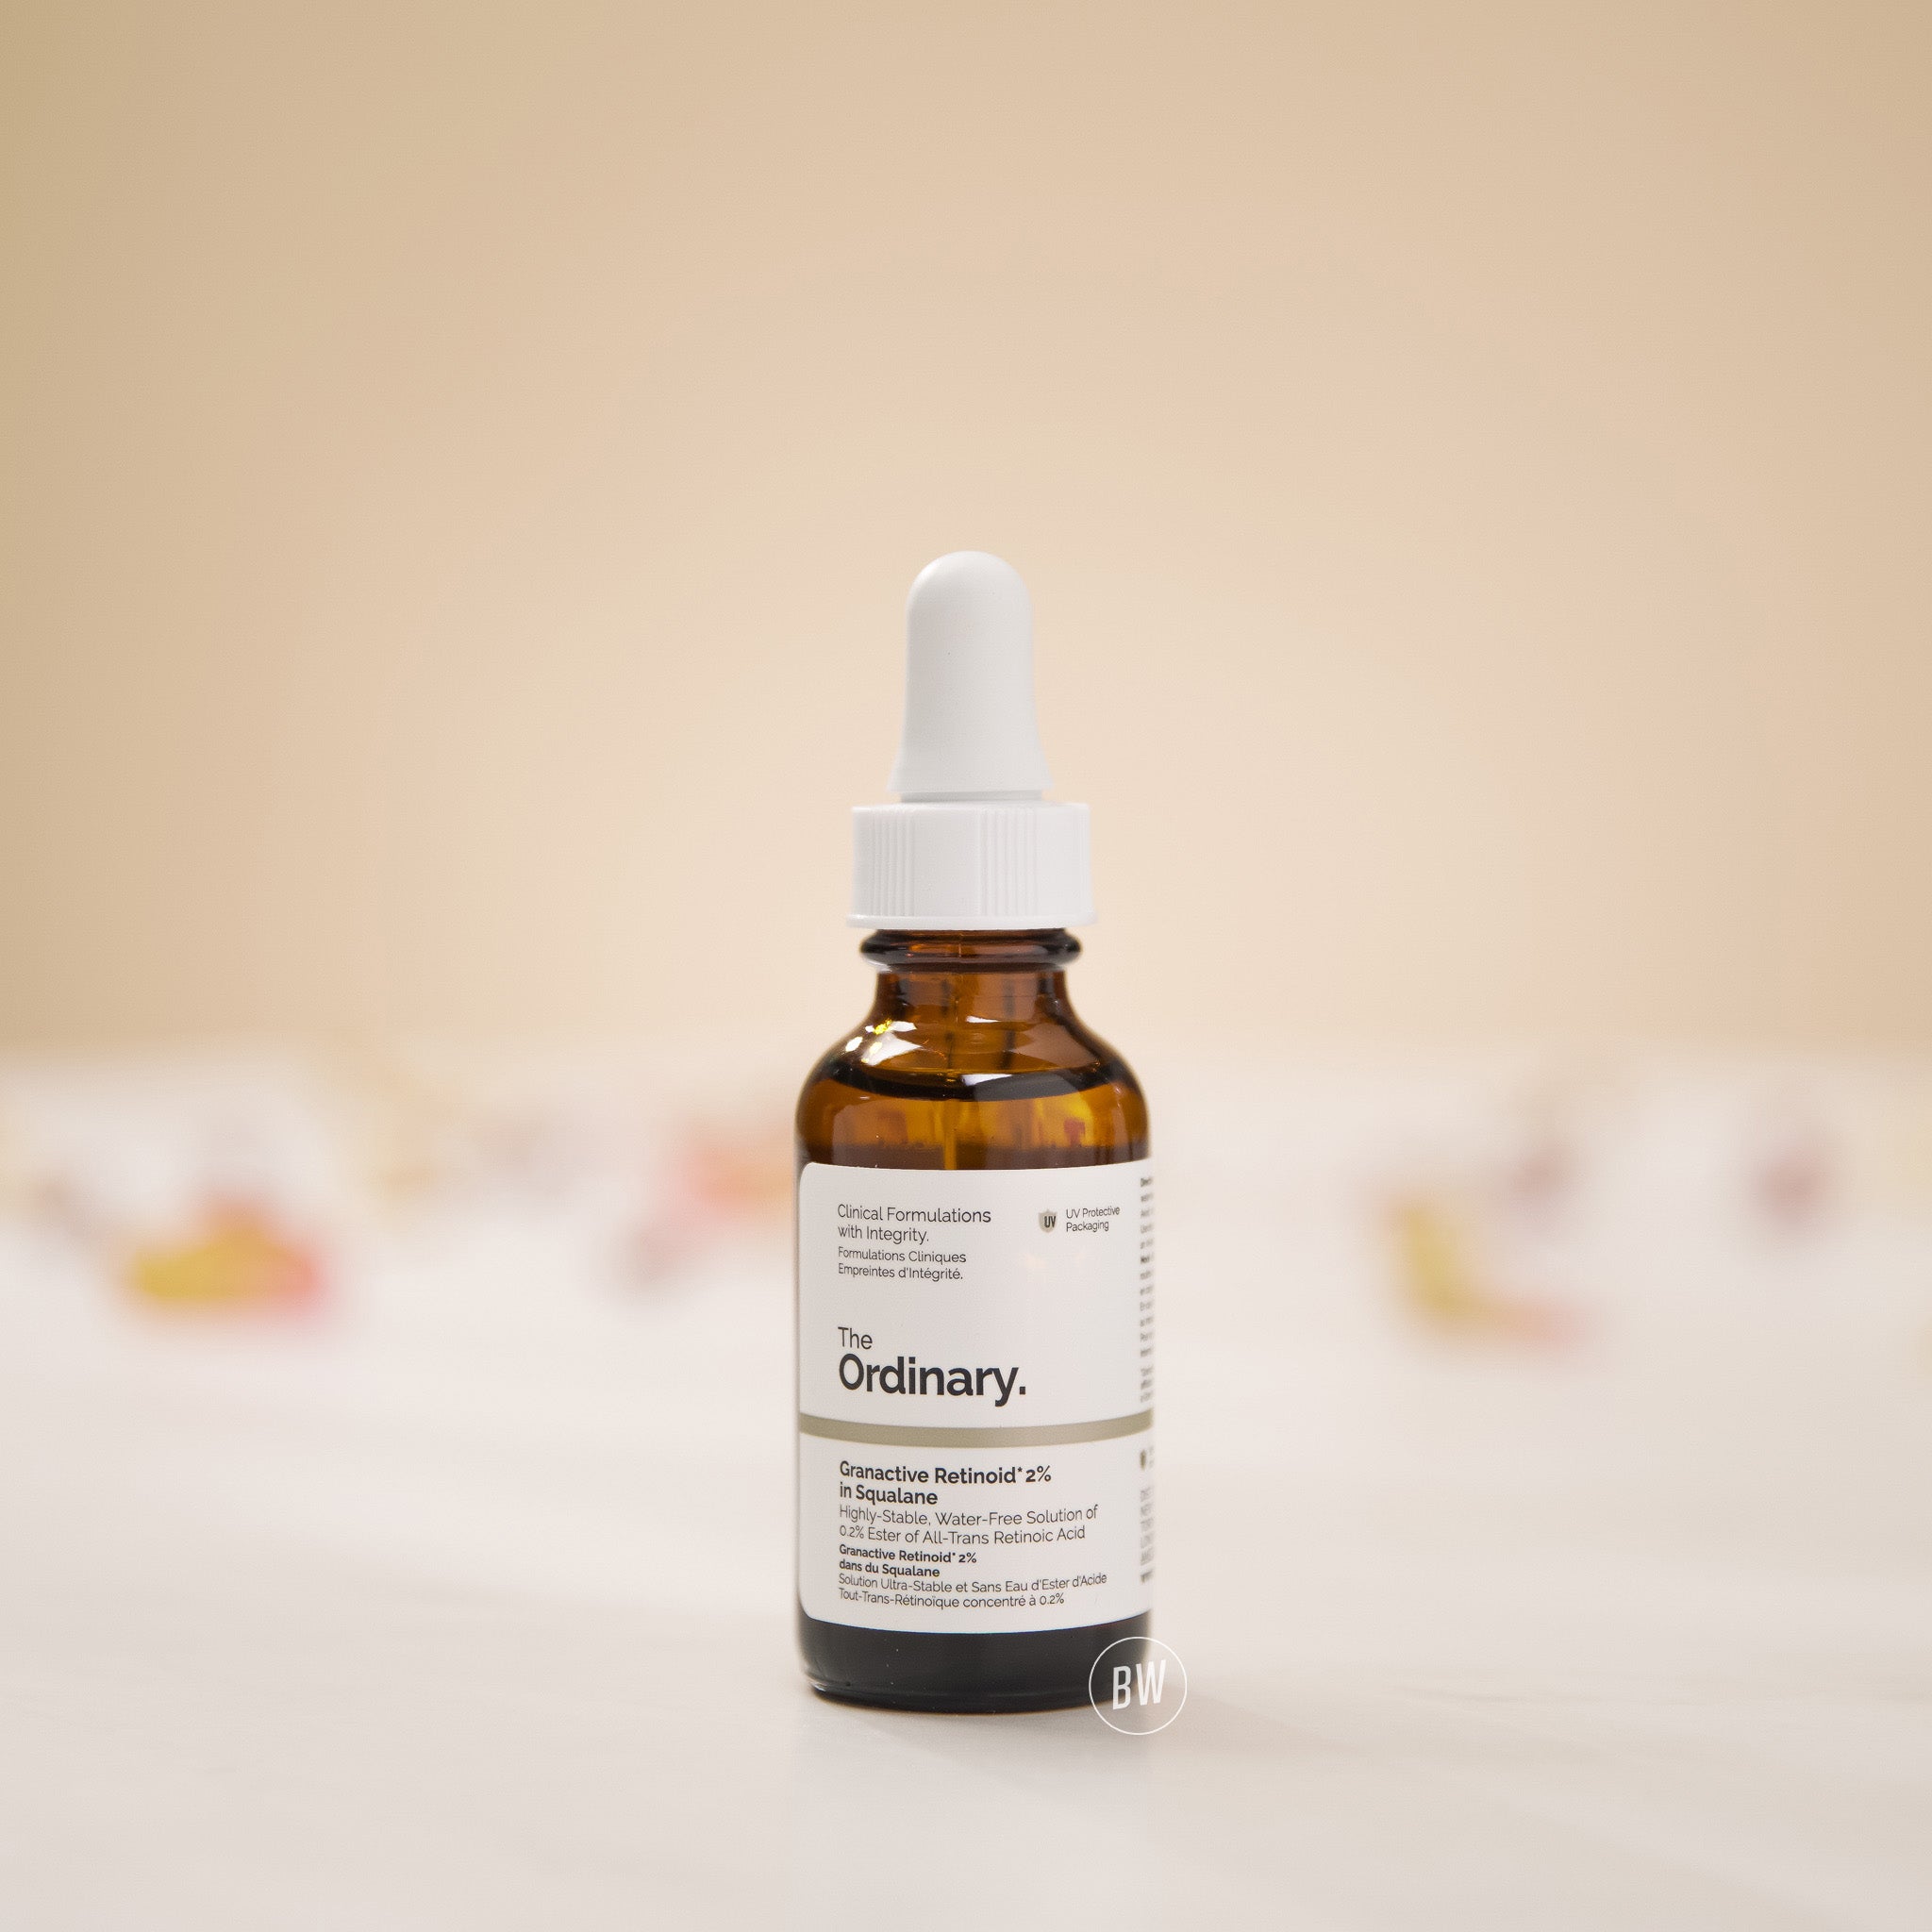 The Ordinary Granactive Retinoid 2% in Squalane Beauty Within